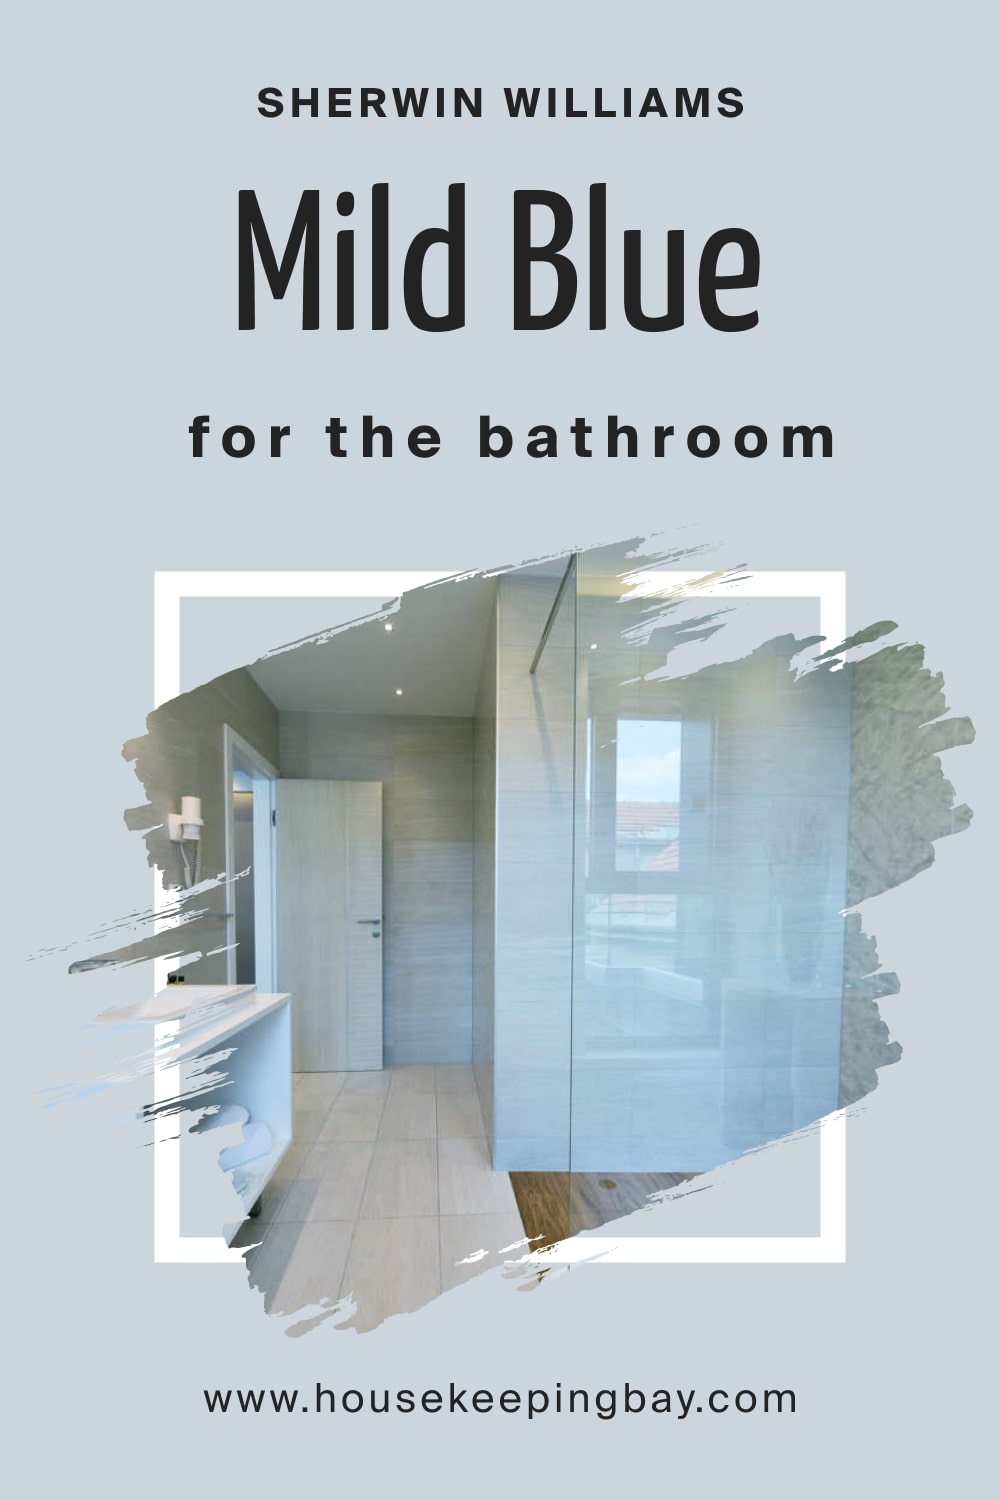 Sherwin Williams.Mild Blue SW 6533 For the Bathroom